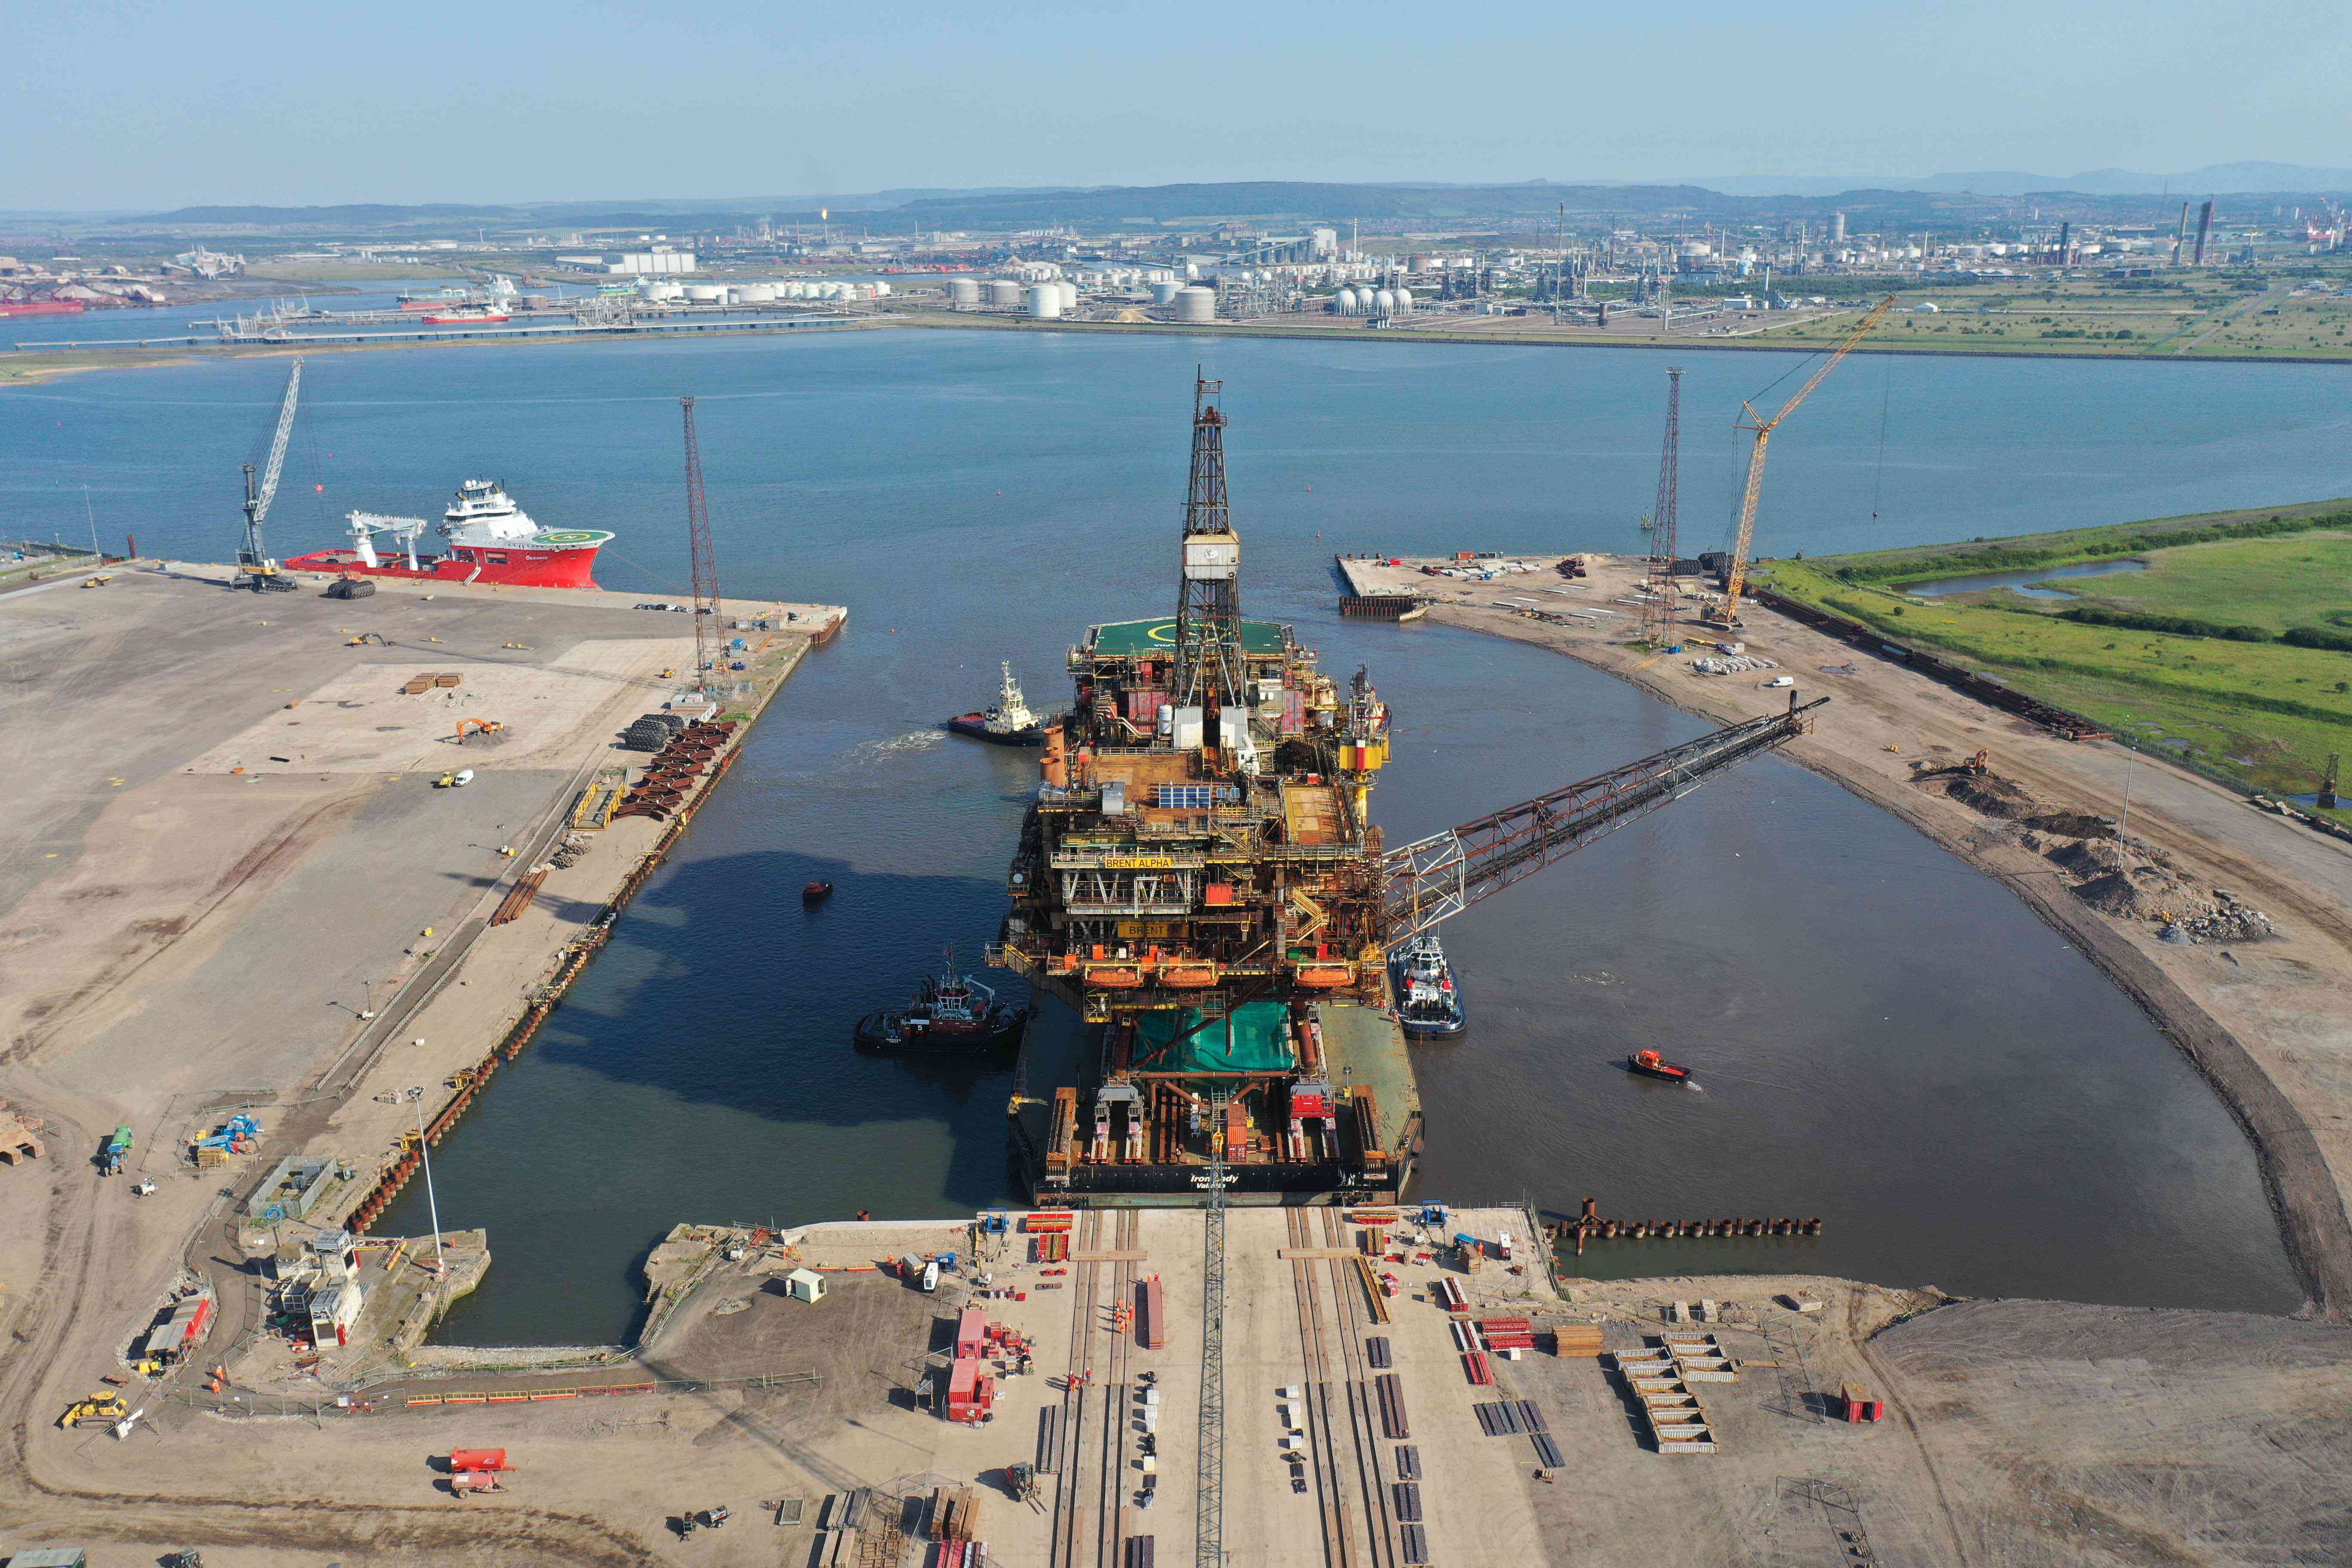 Arrival of the Giant 17,000 tonne Shell Brent Alpha Rig at ASP